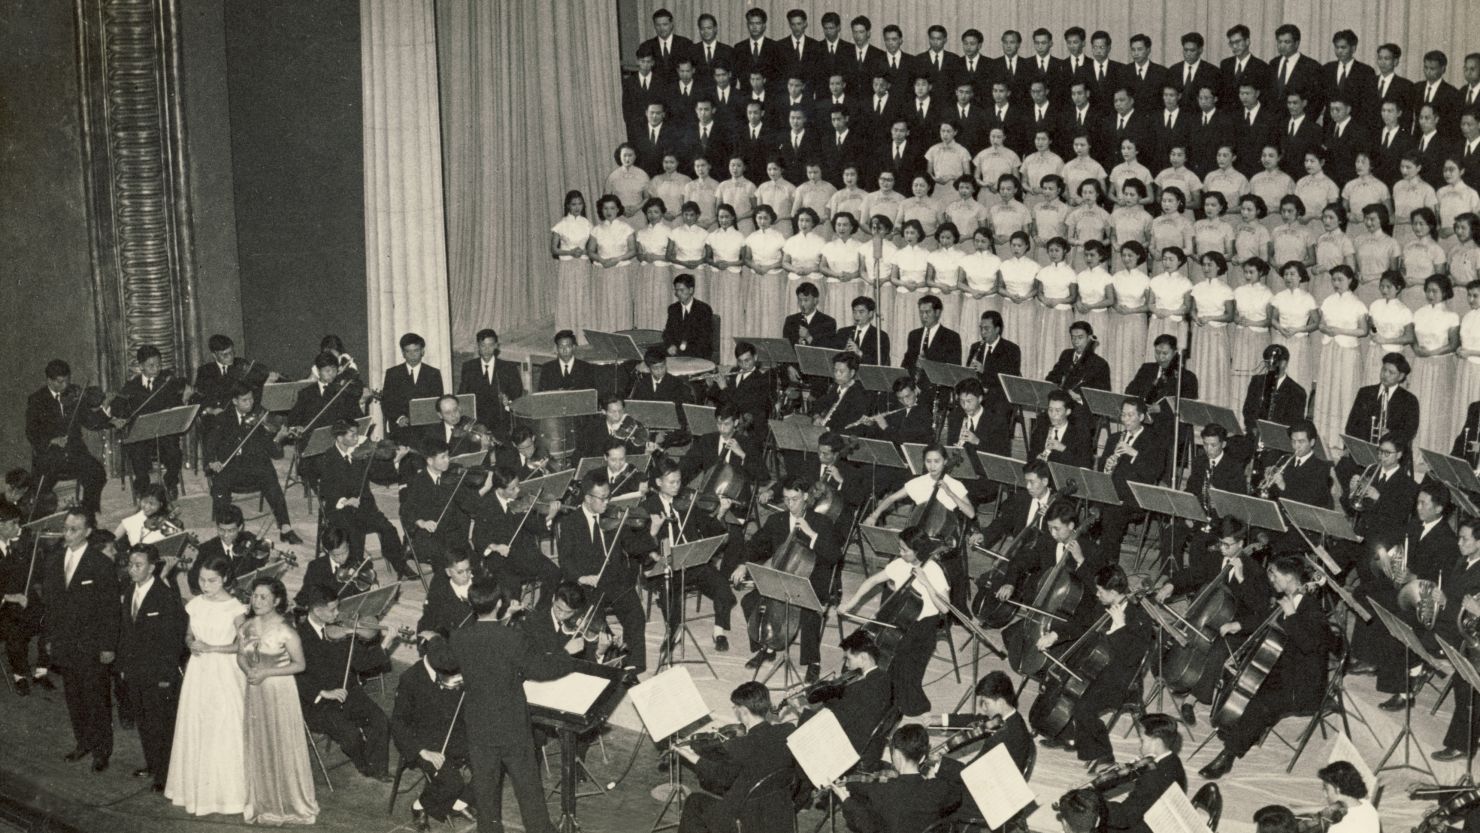 Li Delun leads the Chinese National Symphony Orchestra in their first performance of Beethoven's Ninth Symphony in 1959, ten years after Mao Zedong took power